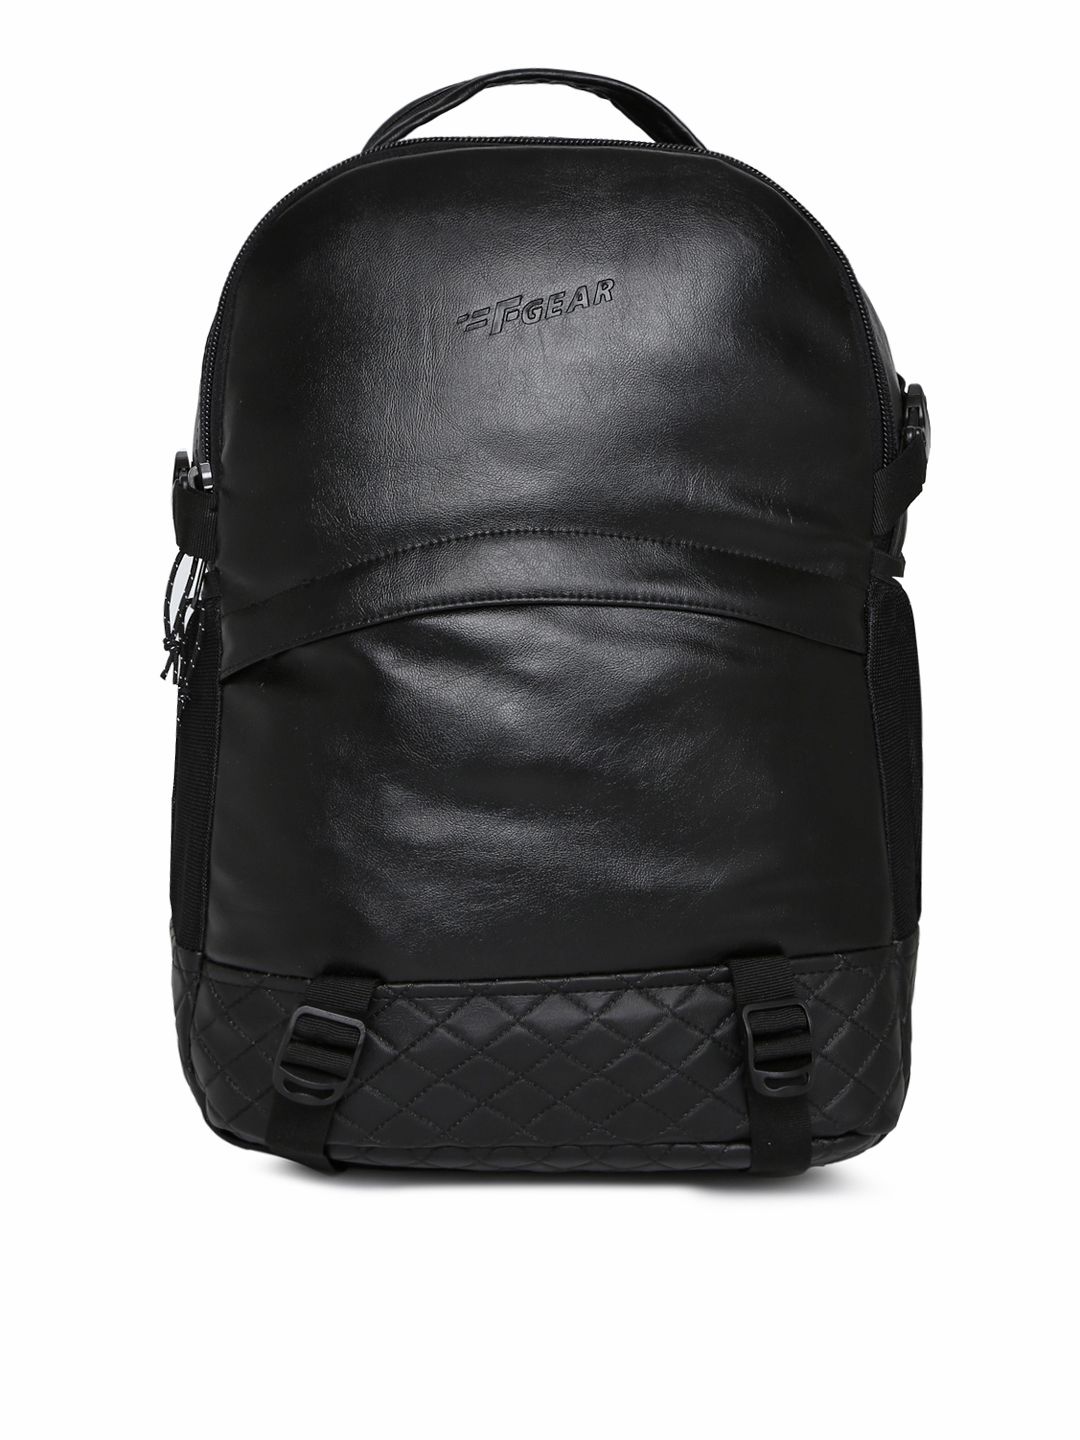 F Gear Unisex Black Solid Backpack Price in India